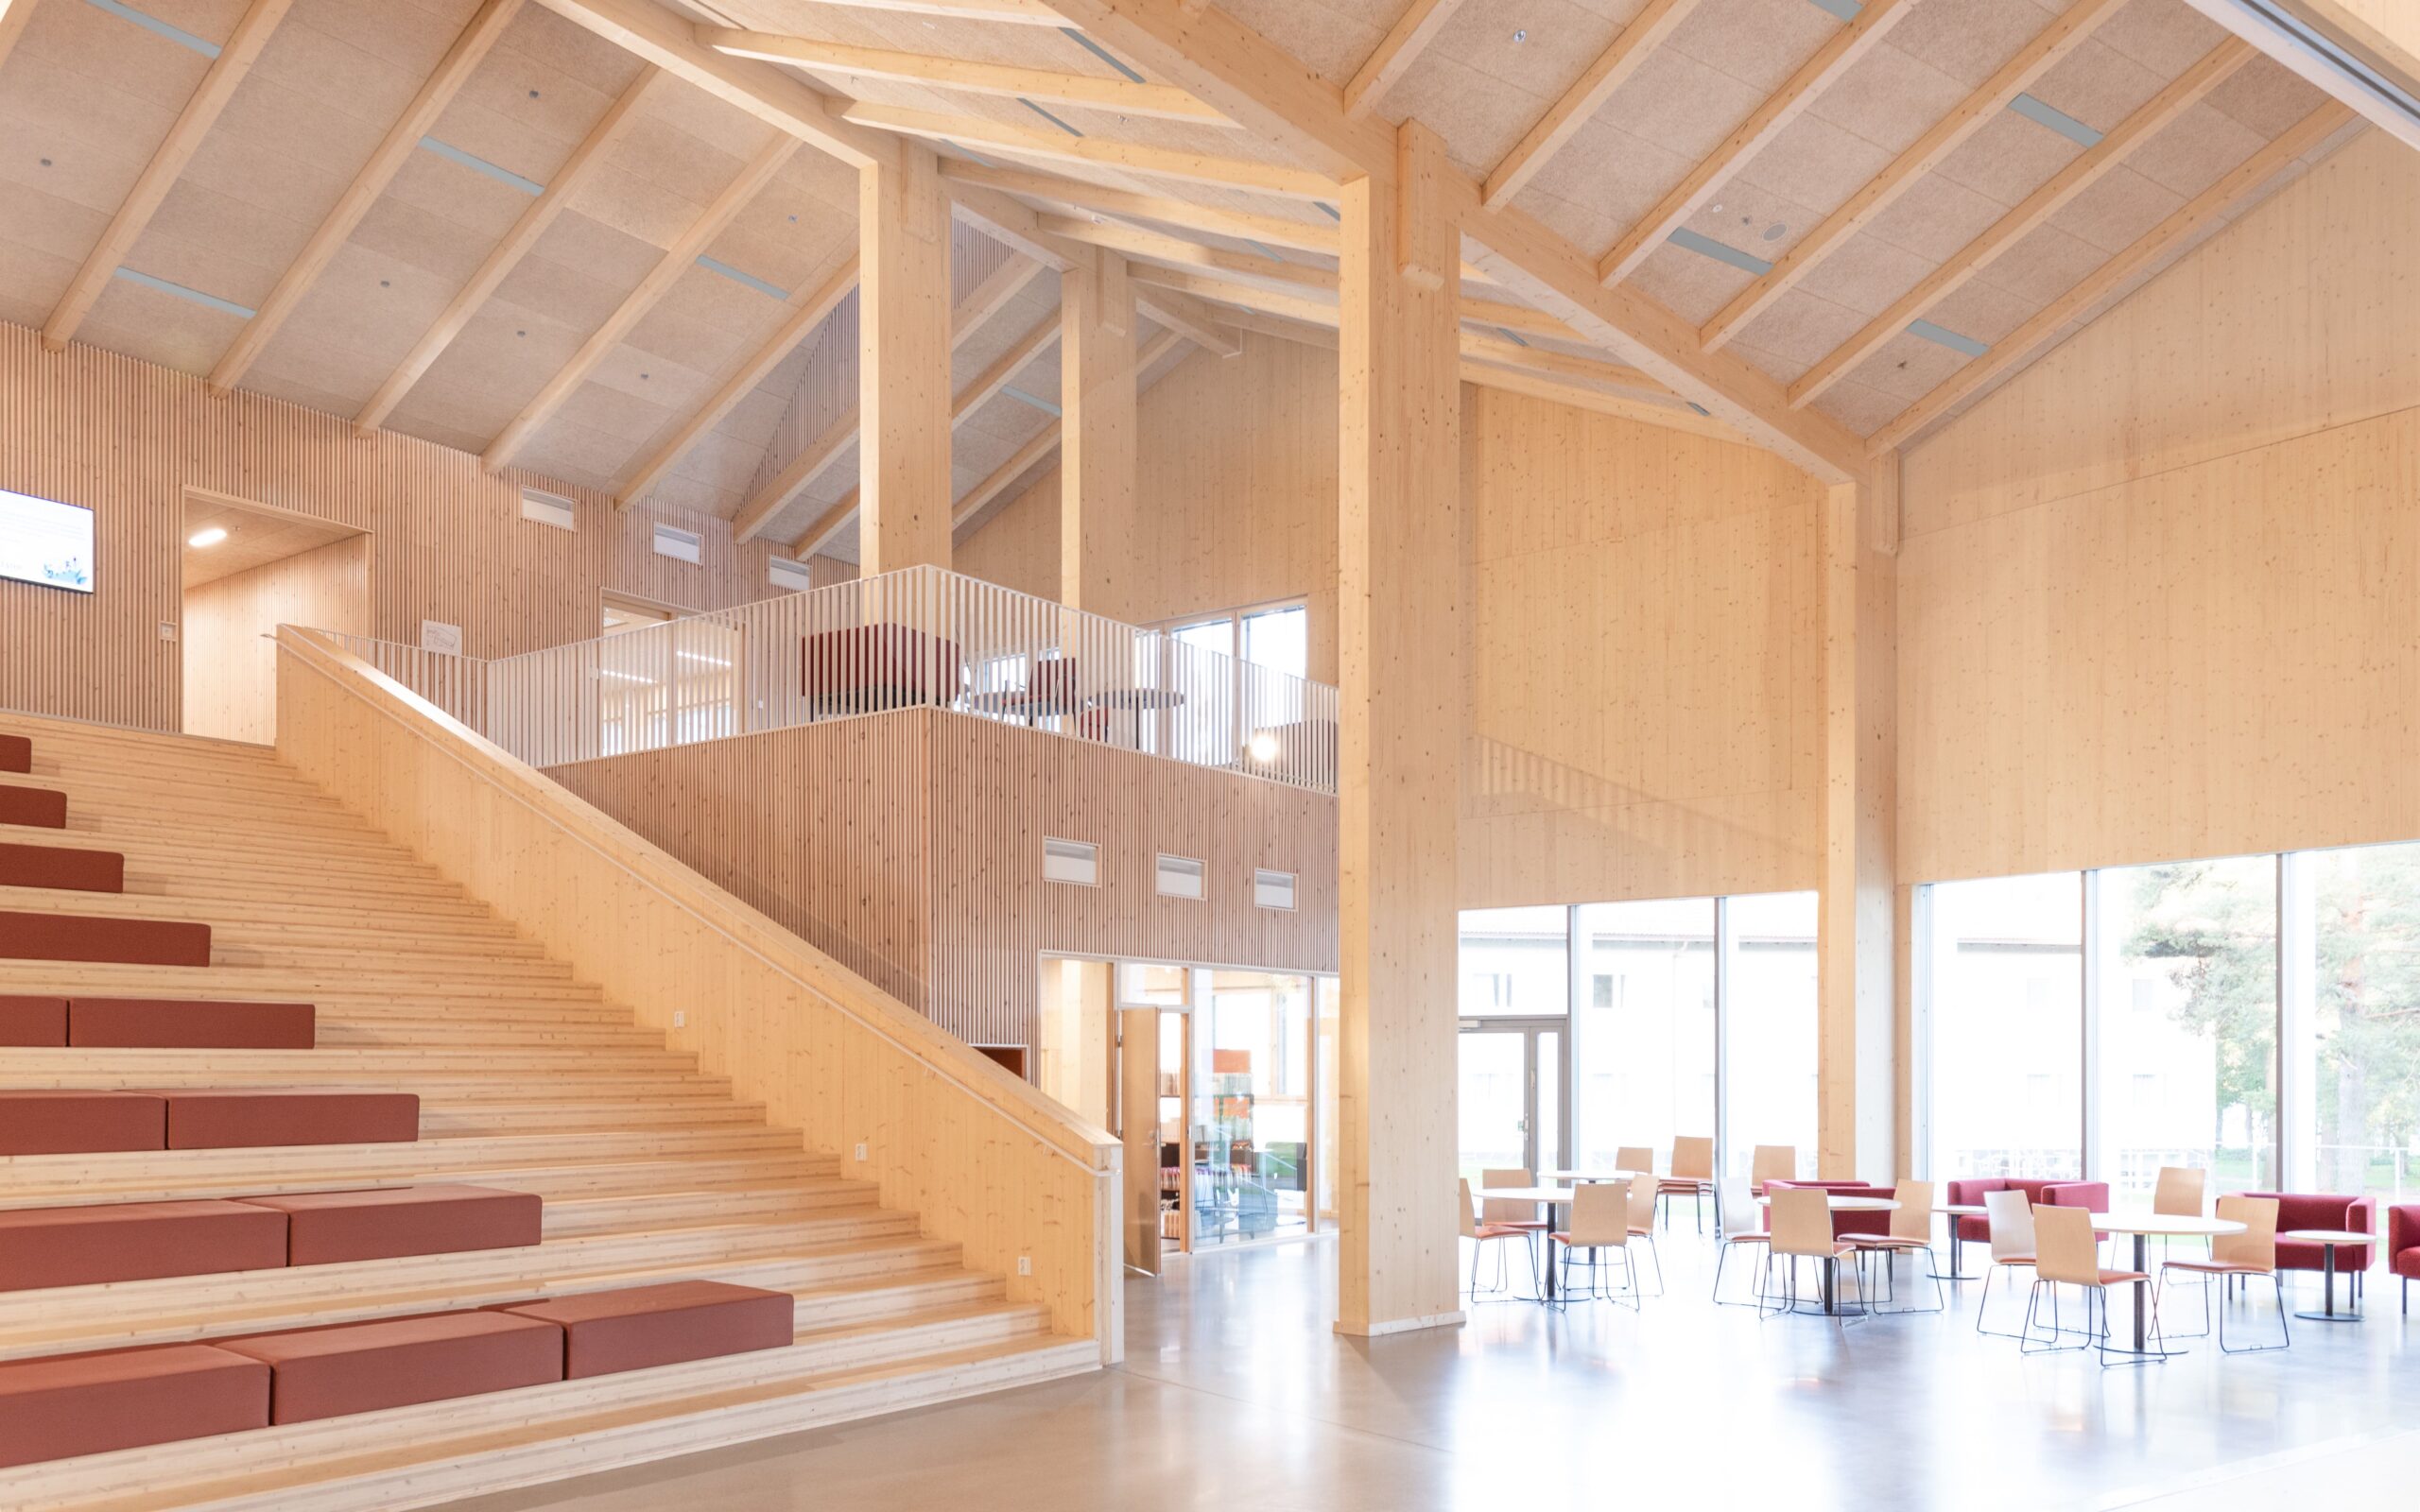 The large wooden central stair in the lobby serves as an open gathering space for the STEP Professional Training Center in Järvenpää